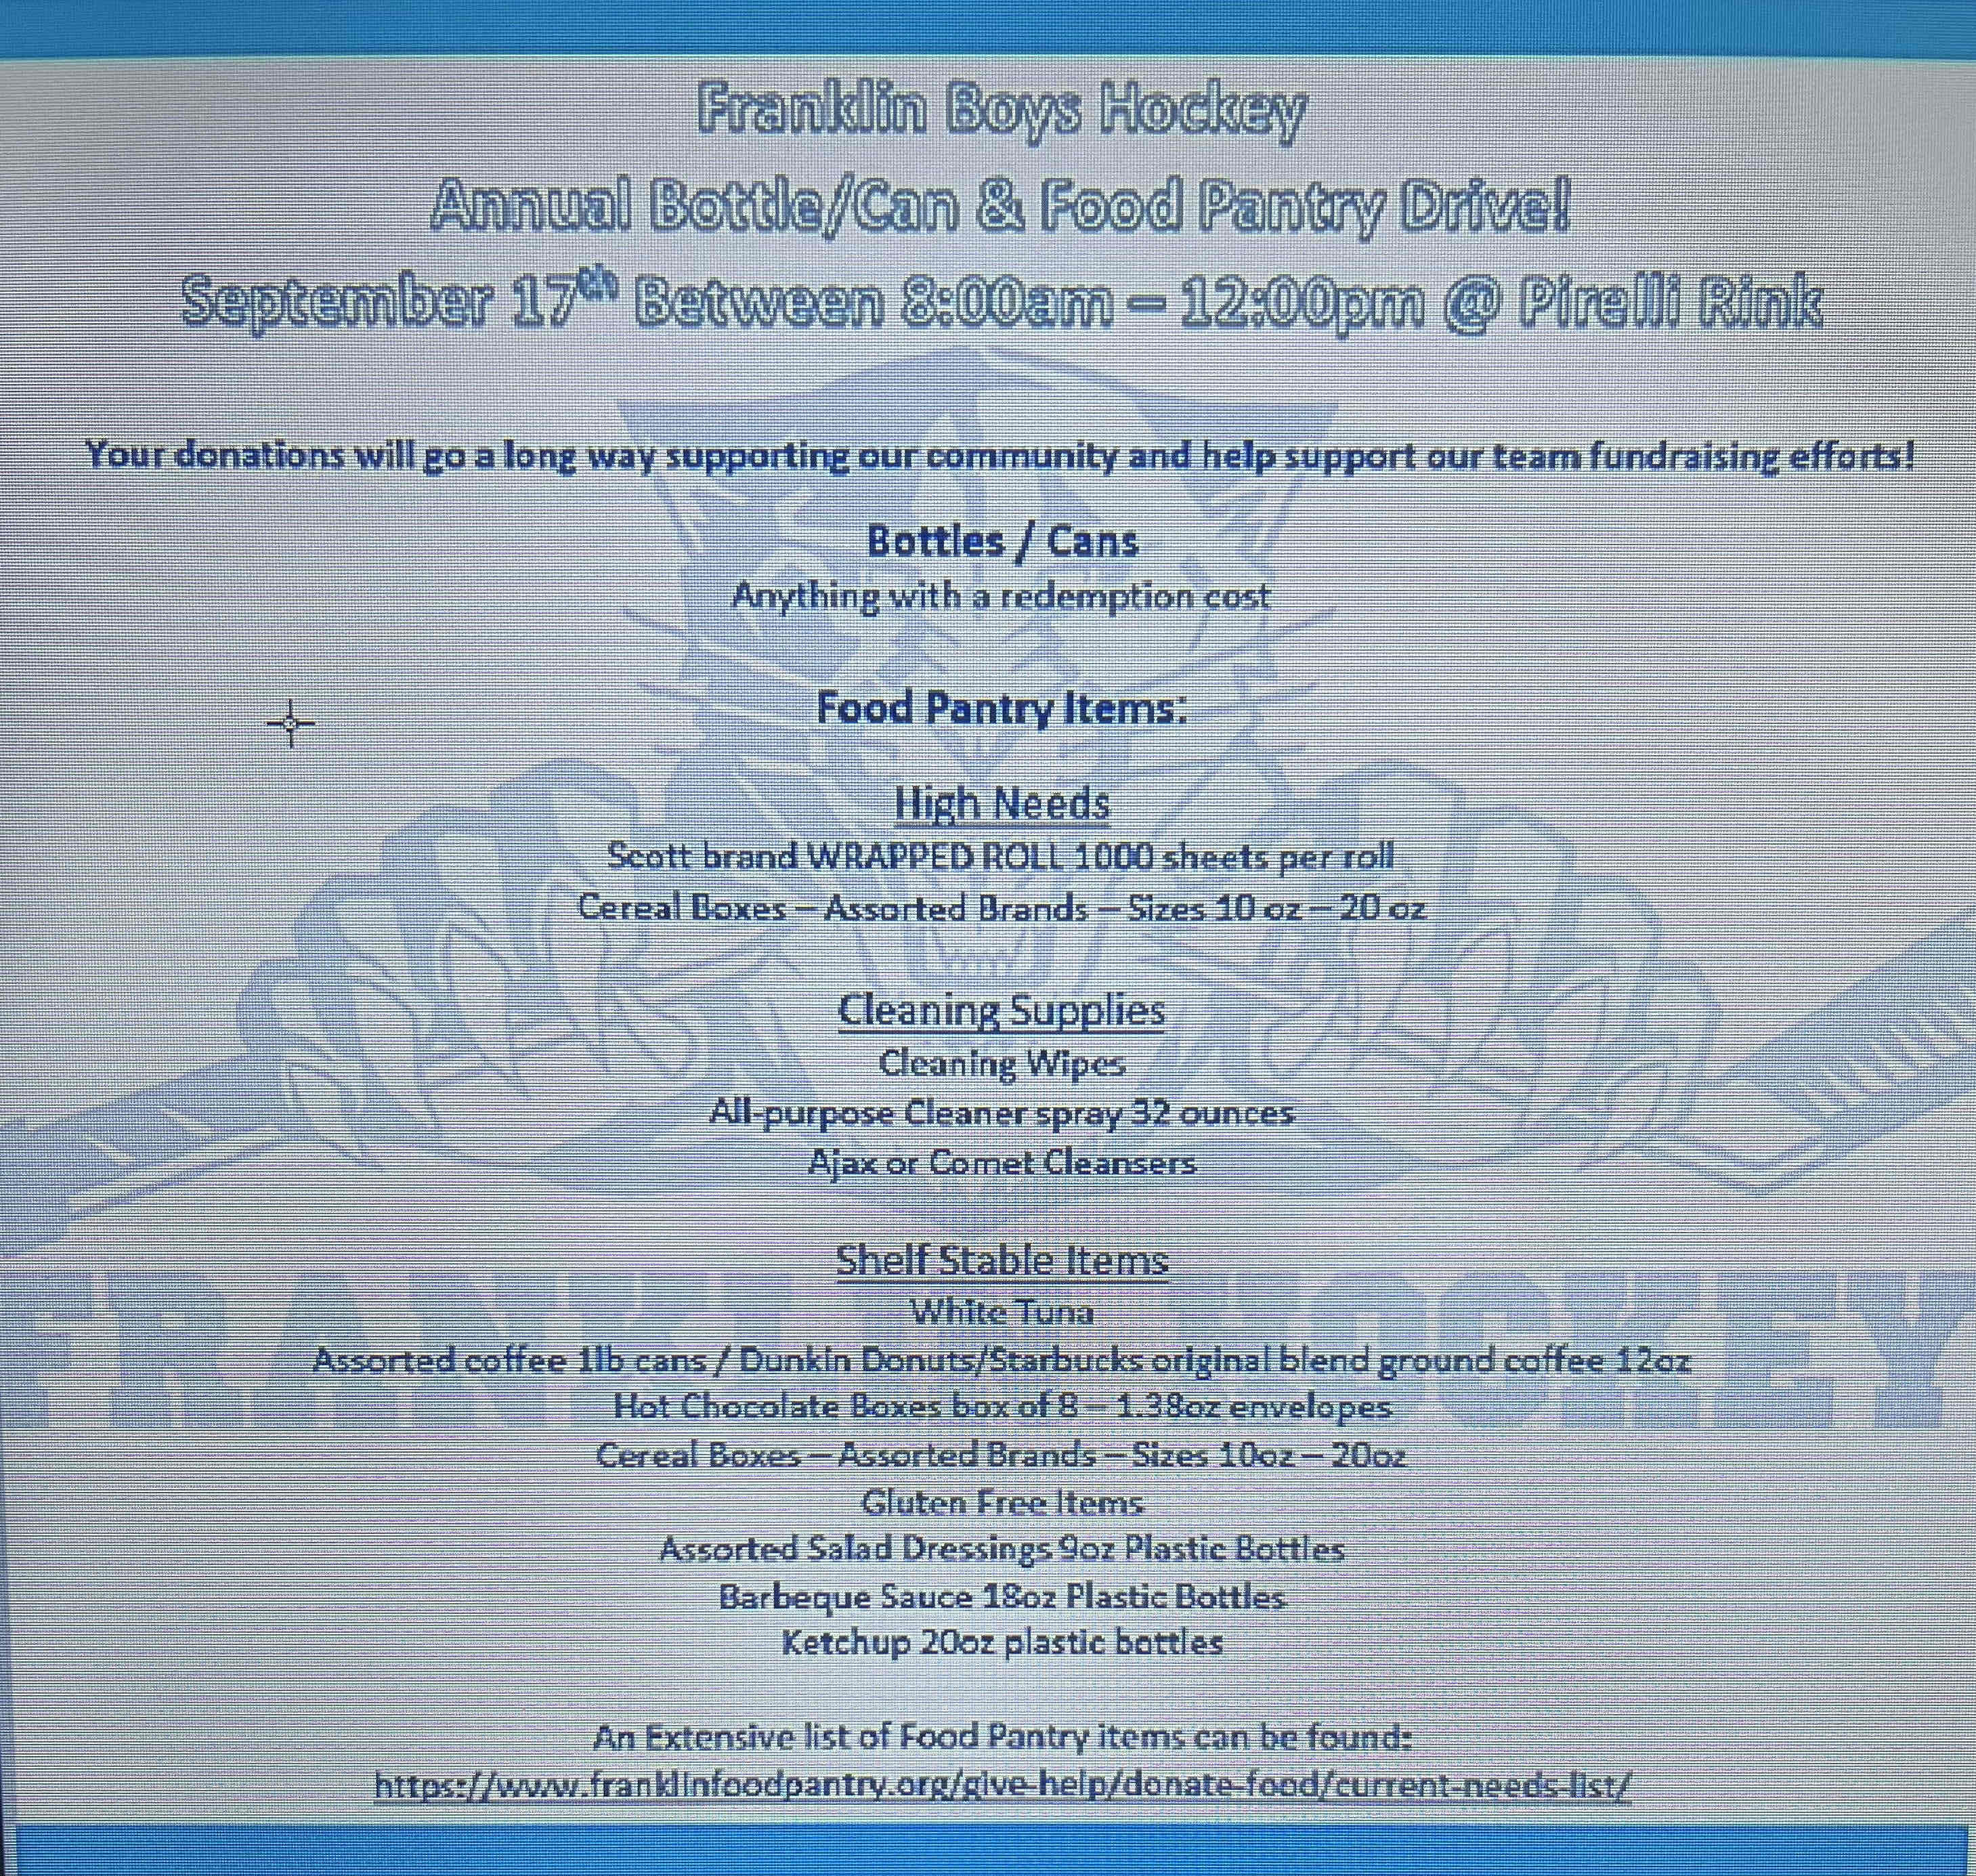 Franklin Boys Hockey schedules their Annual Bottle/Can & Food Pantry Drive!